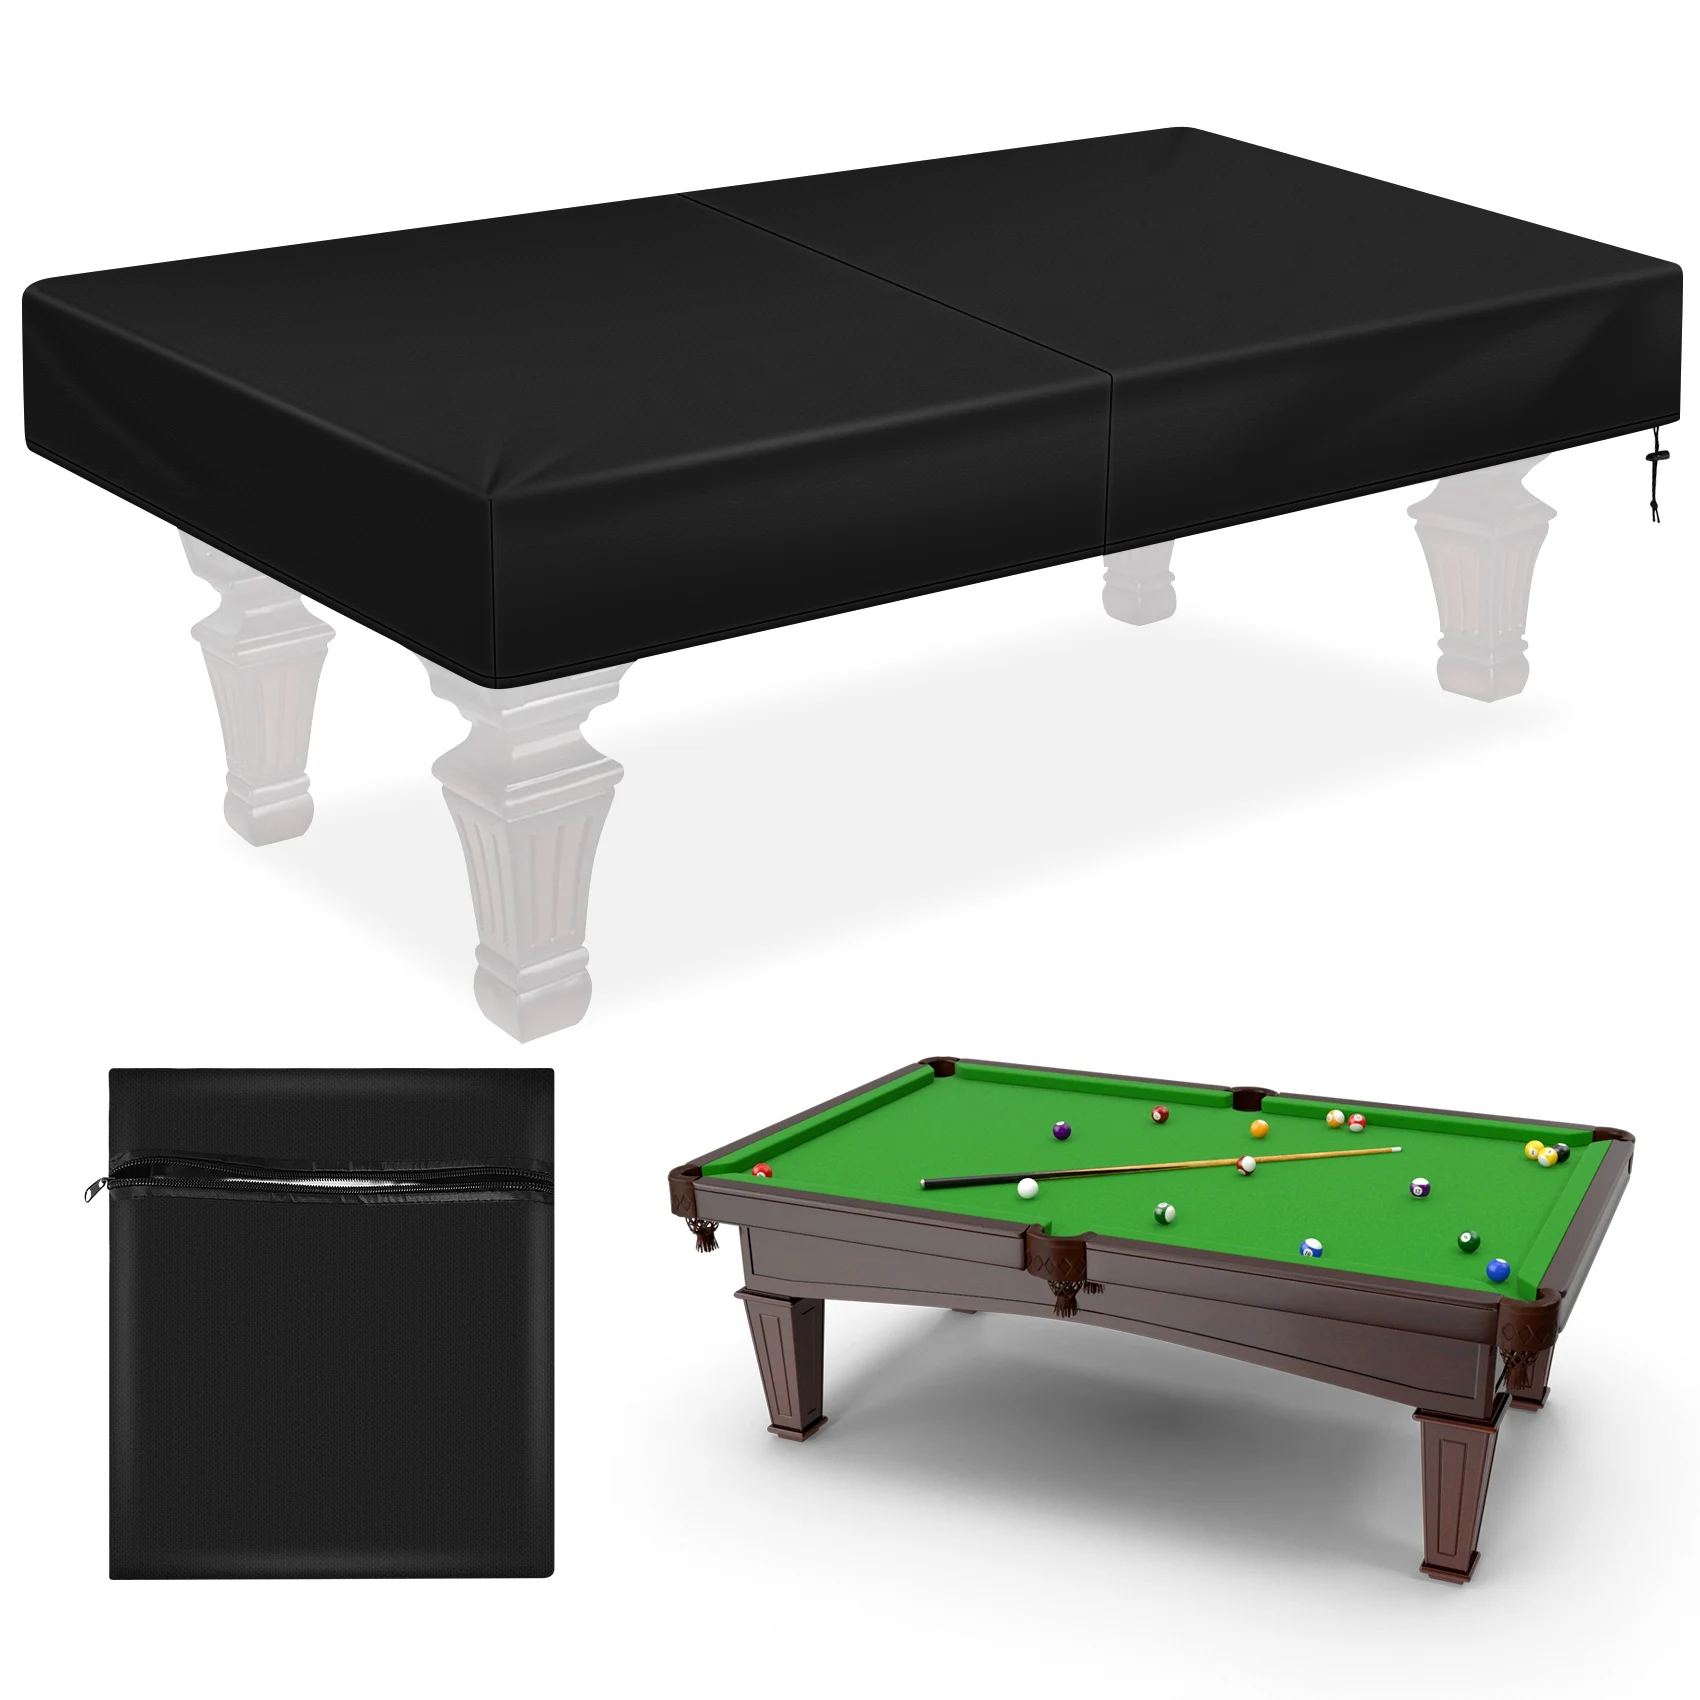 

8Ft Billiard Pool Table Cover With Drawstring Durable Waterproof Table Cover For Rectangle Table, Black